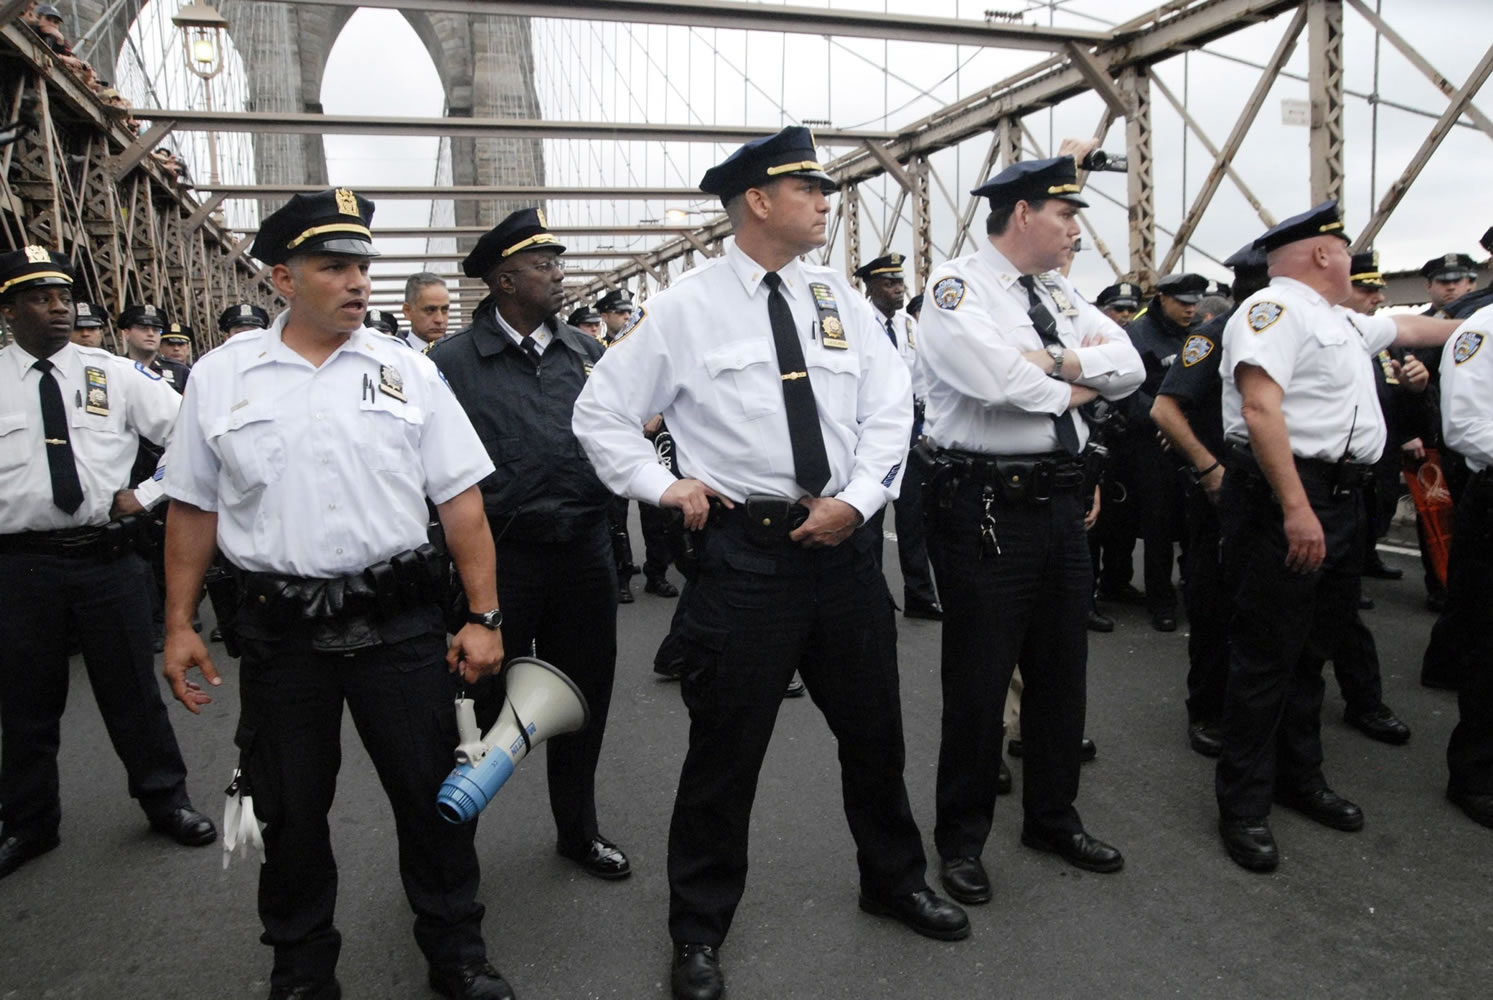 Police turn to face the front line of protesters Saturday who walked behind them about one third of the way onto New York's Brooklyn Bridge before police began making arrests during Saturday's march by Occupy Wall Street. Protesters speaking out against corporate greed and other grievances attempted to walk over the bridge from Manhattan, resulting in the arrest of more than 700 during a tense confrontation with police.